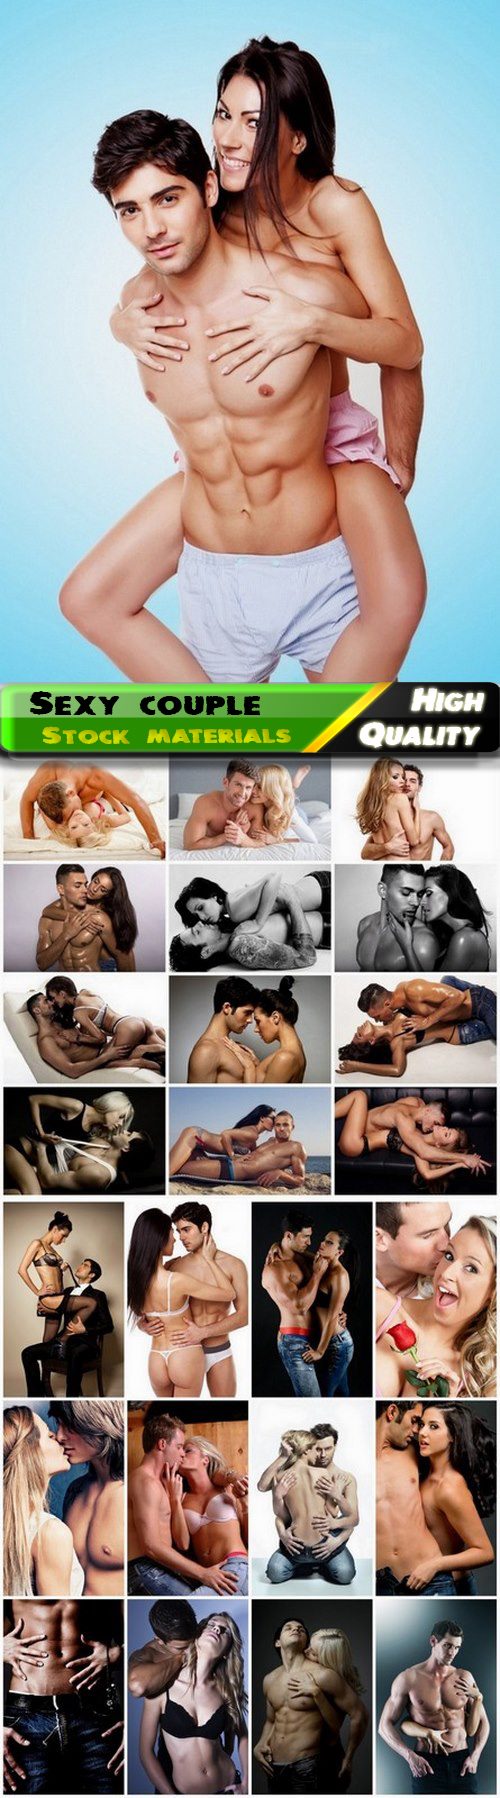 Sexy nude erotic couple of man and woman in love - 25 HQ Jpg